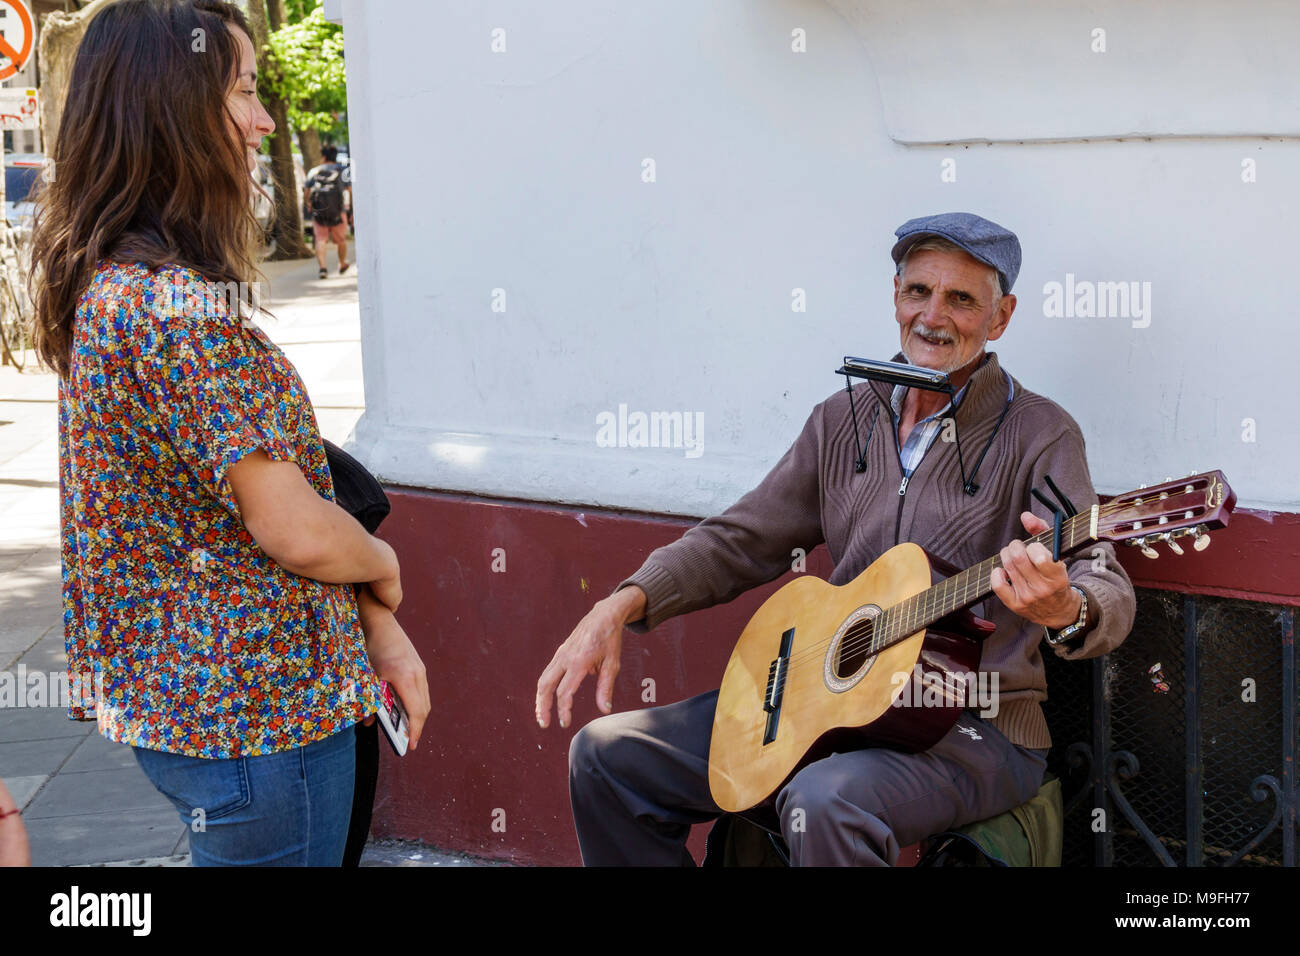 Buenos Aires Argentina,Belgrano,street performer,musician,guitar,harmonica,adult adults man men male,woman women female lady,visitors travel traveling Stock Photo